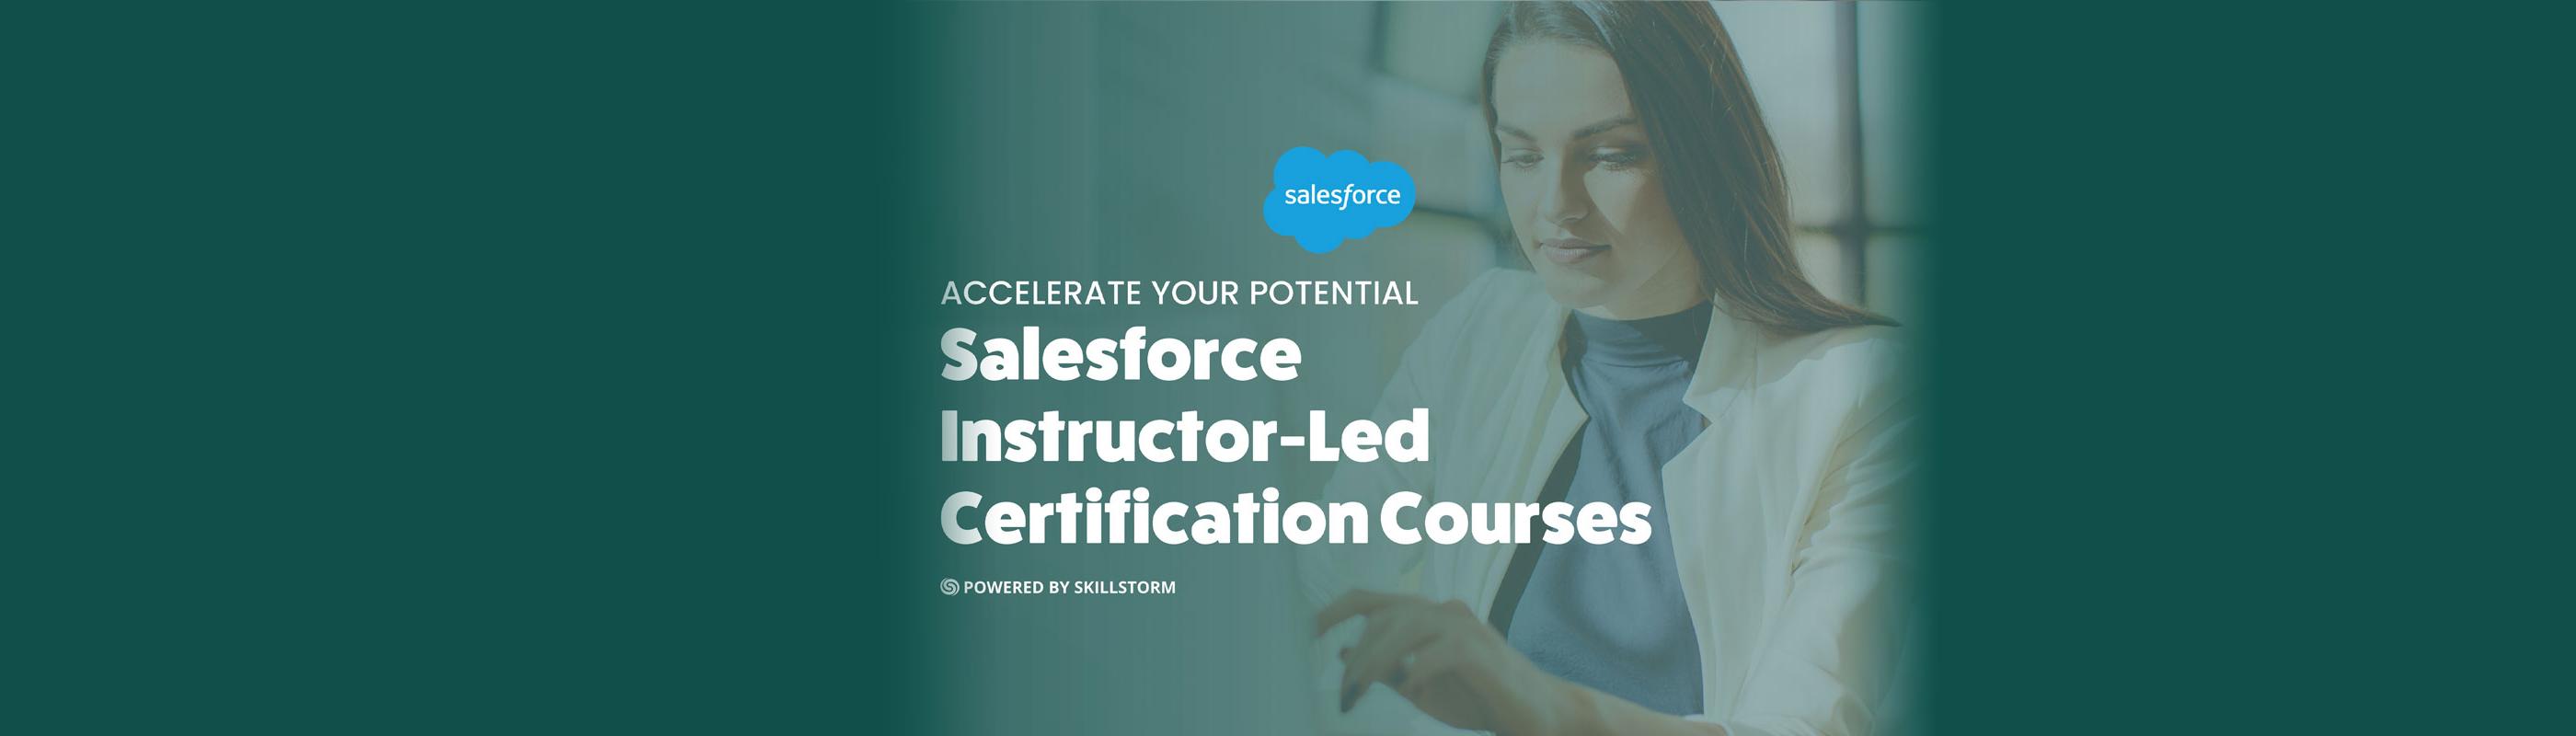 Salesforce Instructor-Led Certification Courses powered by SkillStorm